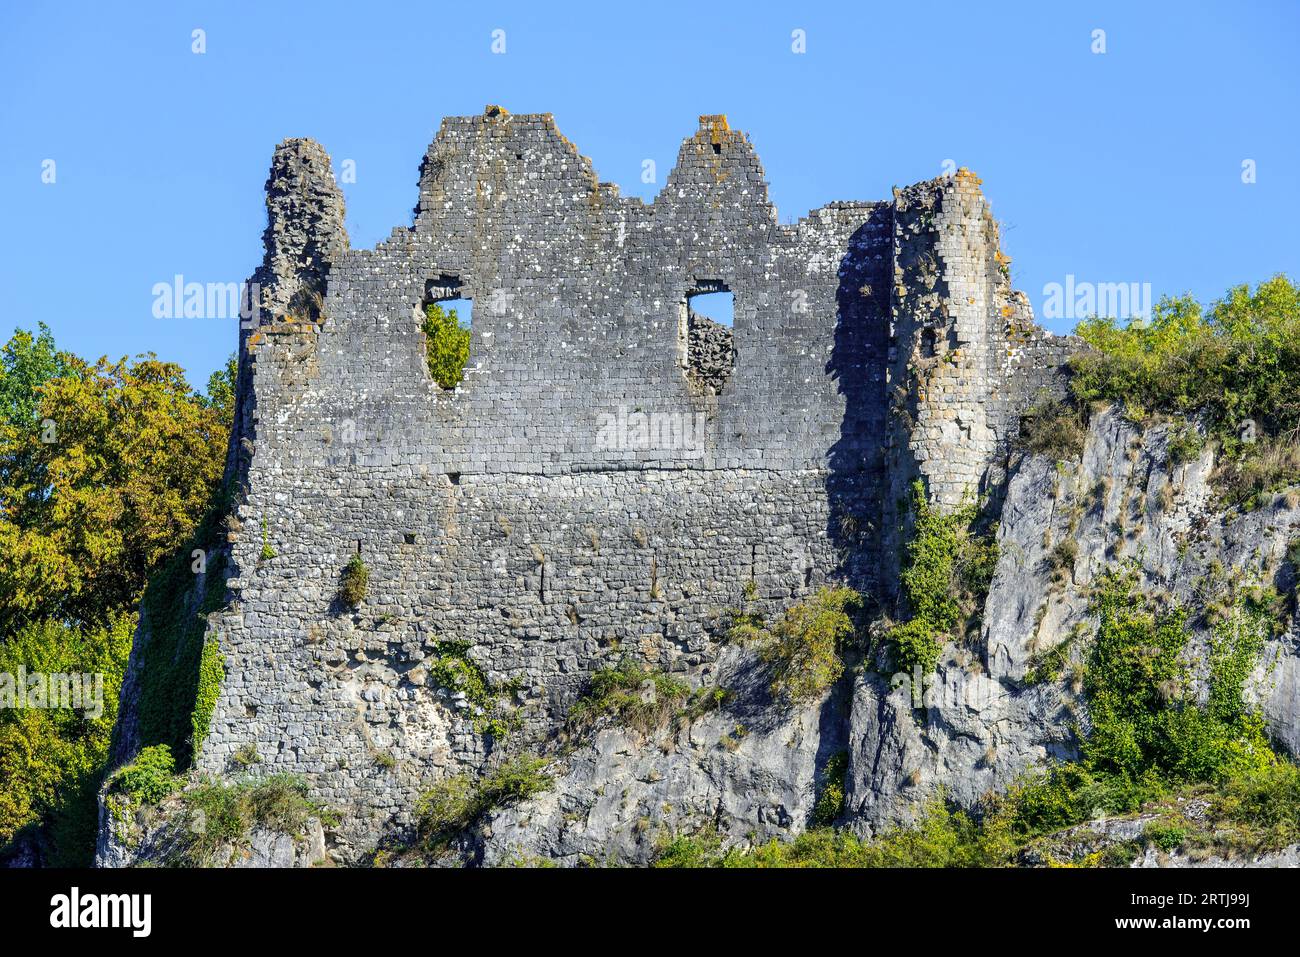 Château de Montaigle in summer, 14th century ruined medieval castle in Falaën, Onhaye, province of Namur, Wallonia, Belgian Ardennes, Belgium Stock Photo